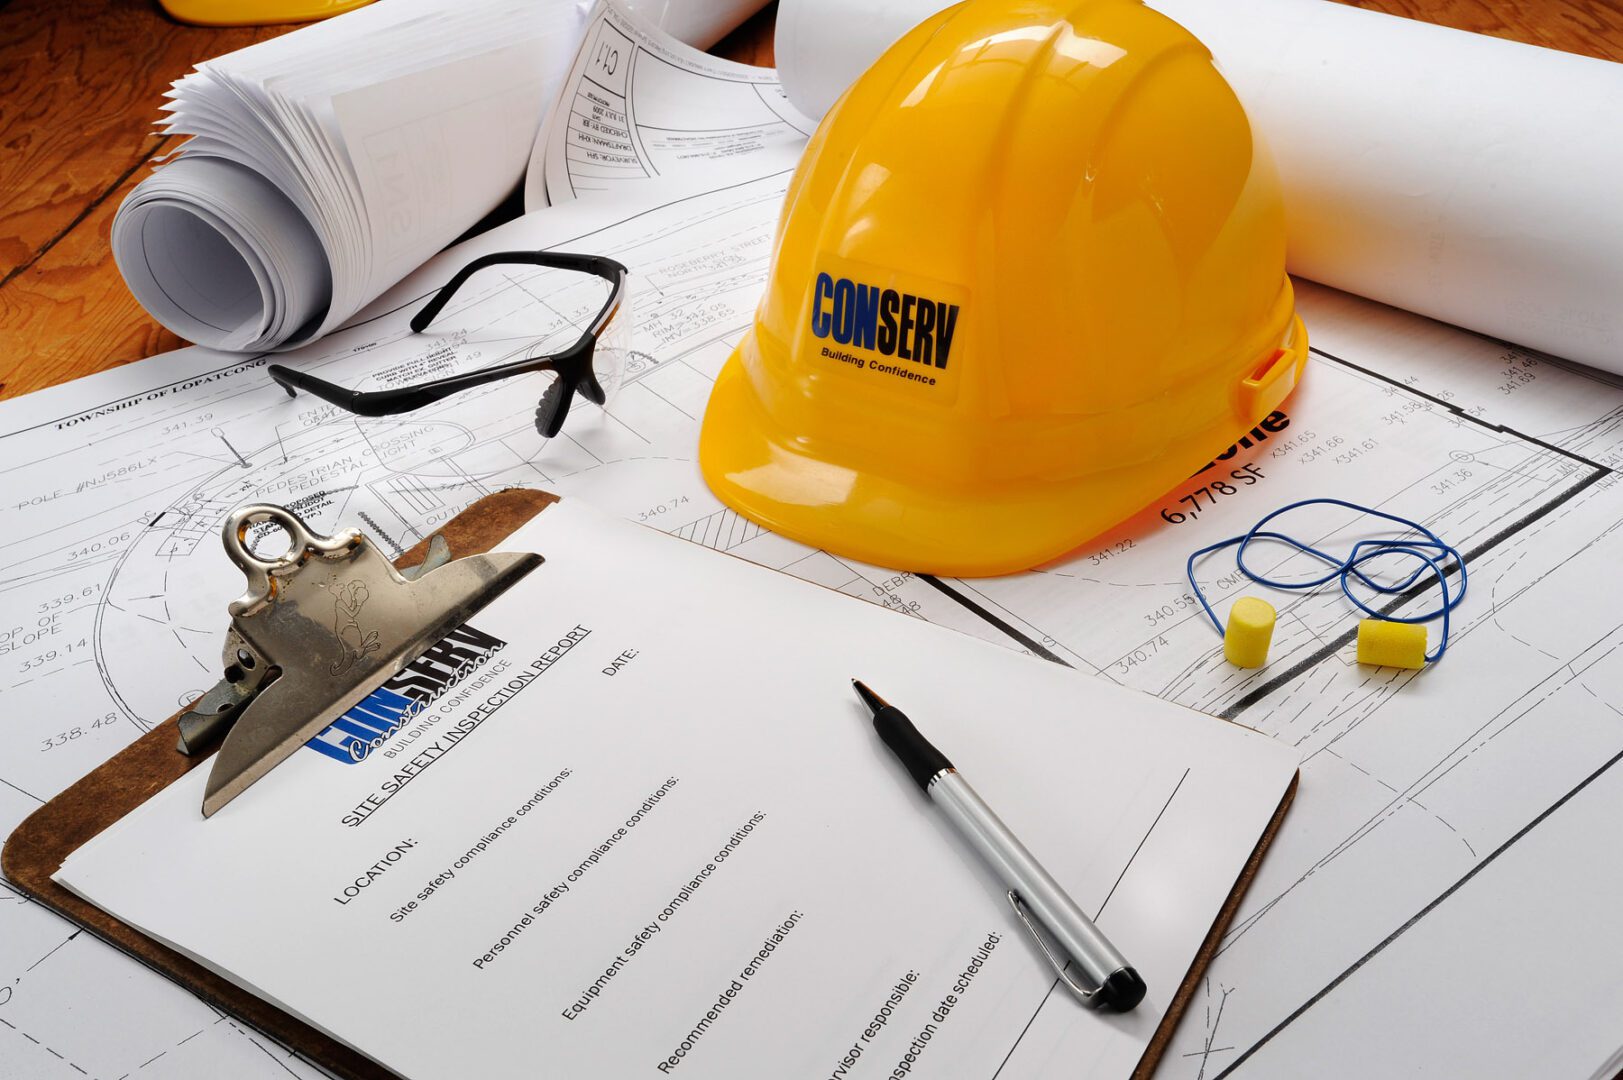 A construction worker 's hard hat sits on top of some papers.